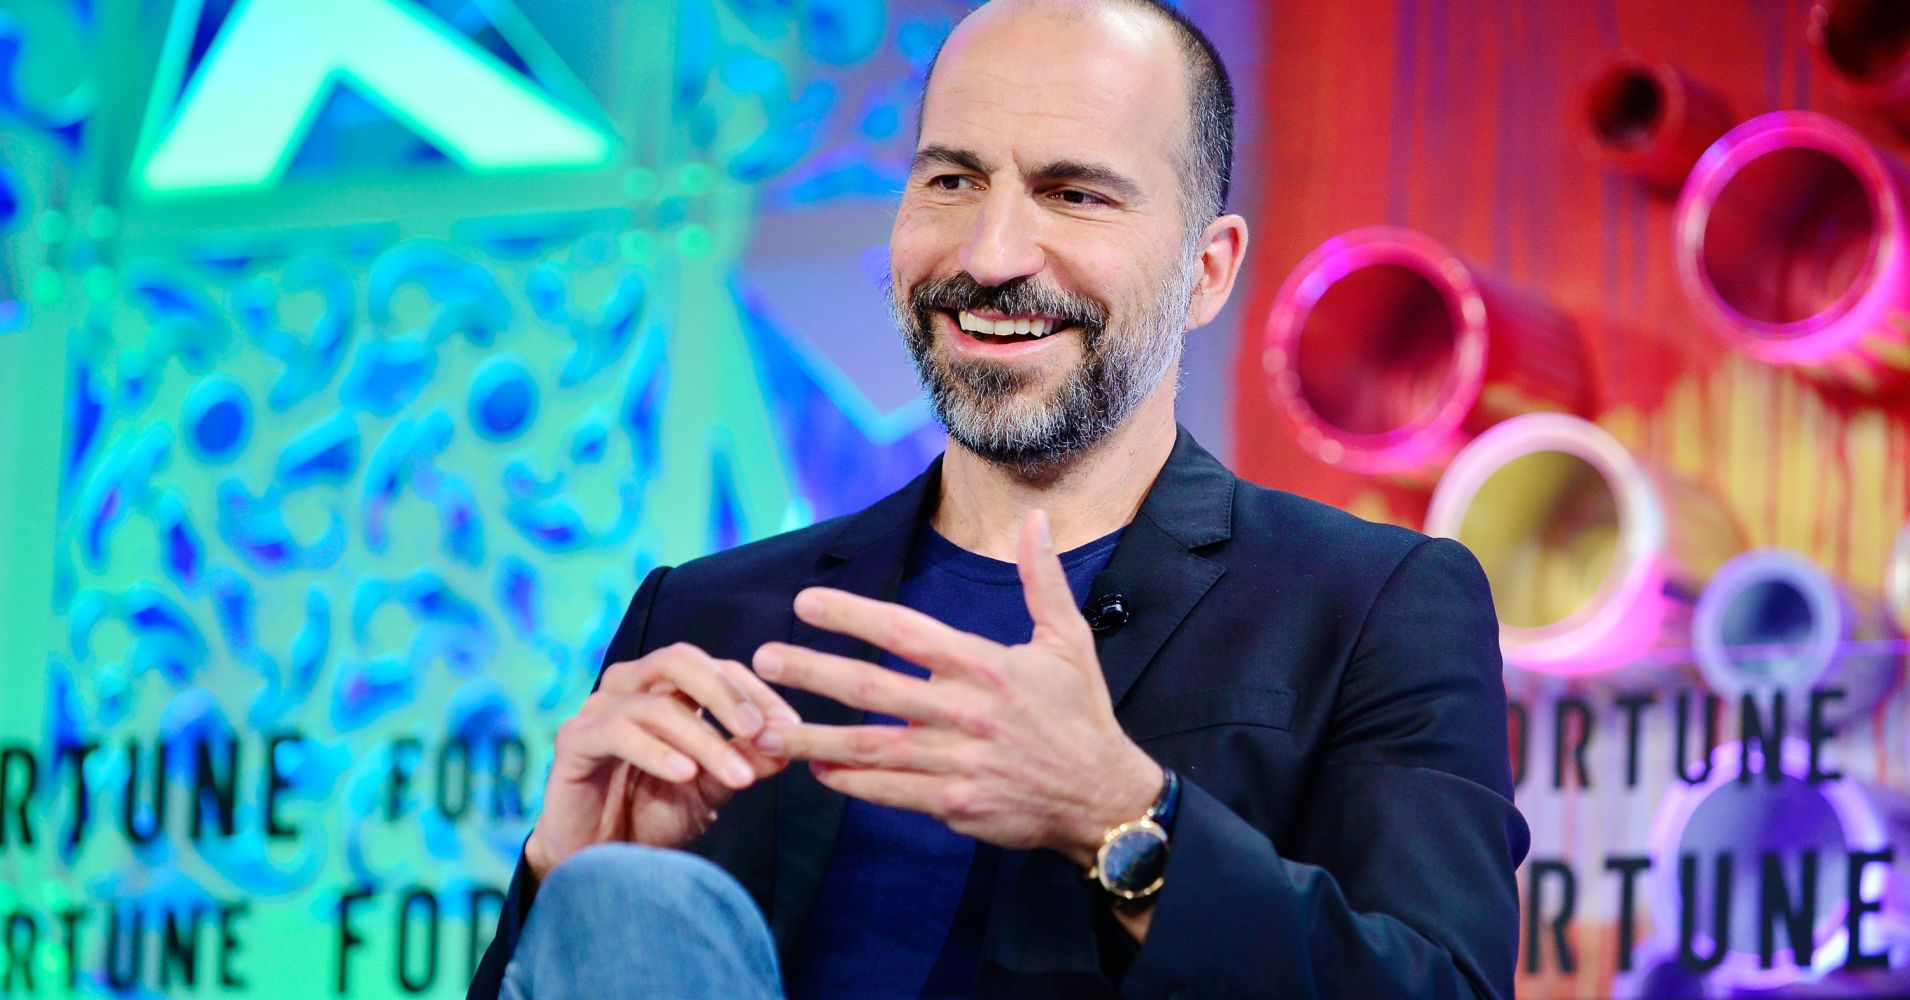 Uber CEO Dara Khosrowshahi attends the Fortune Most Powerful Women Summit in Laguna Niguel, Calif., on Oct. 3, 2018.